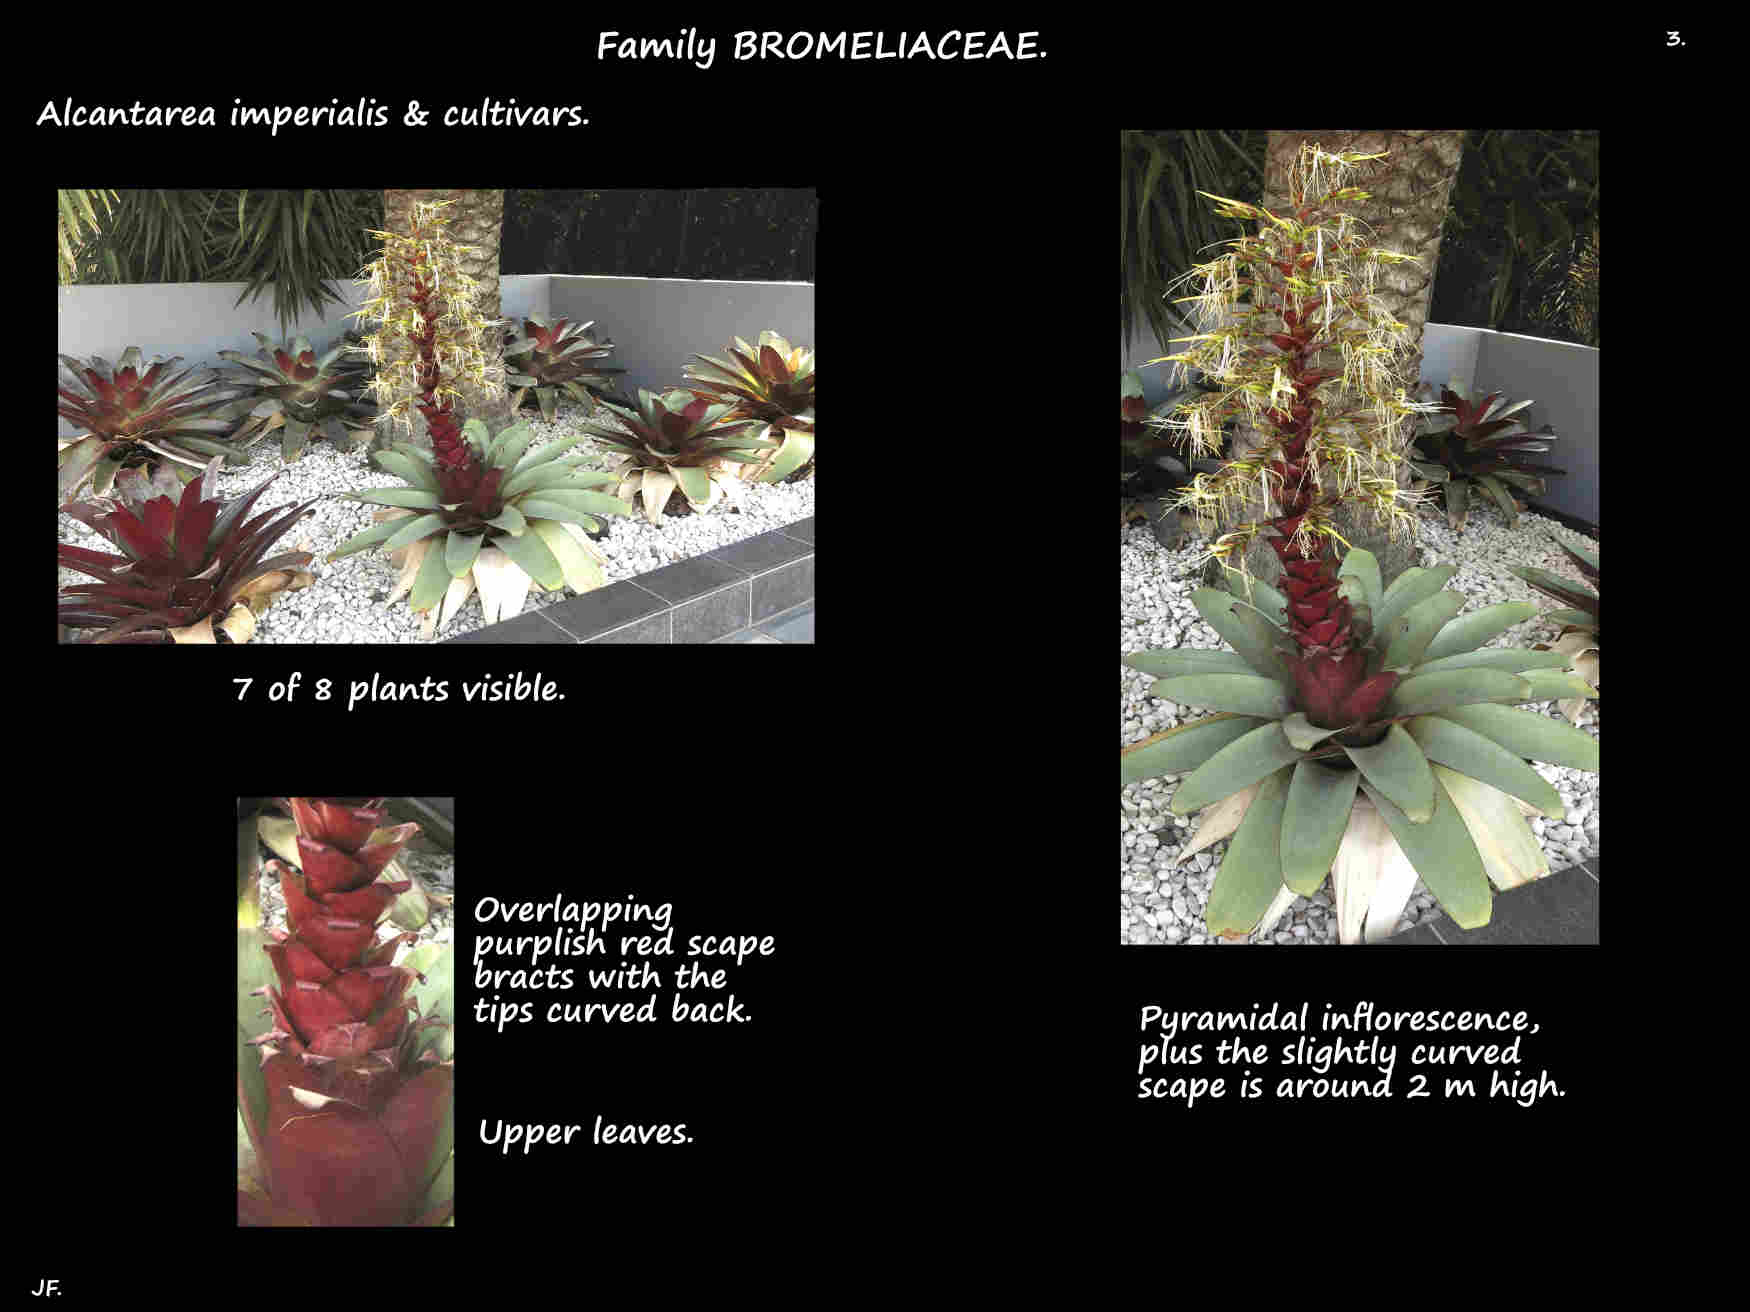 3 A Giant bromeliad in flower